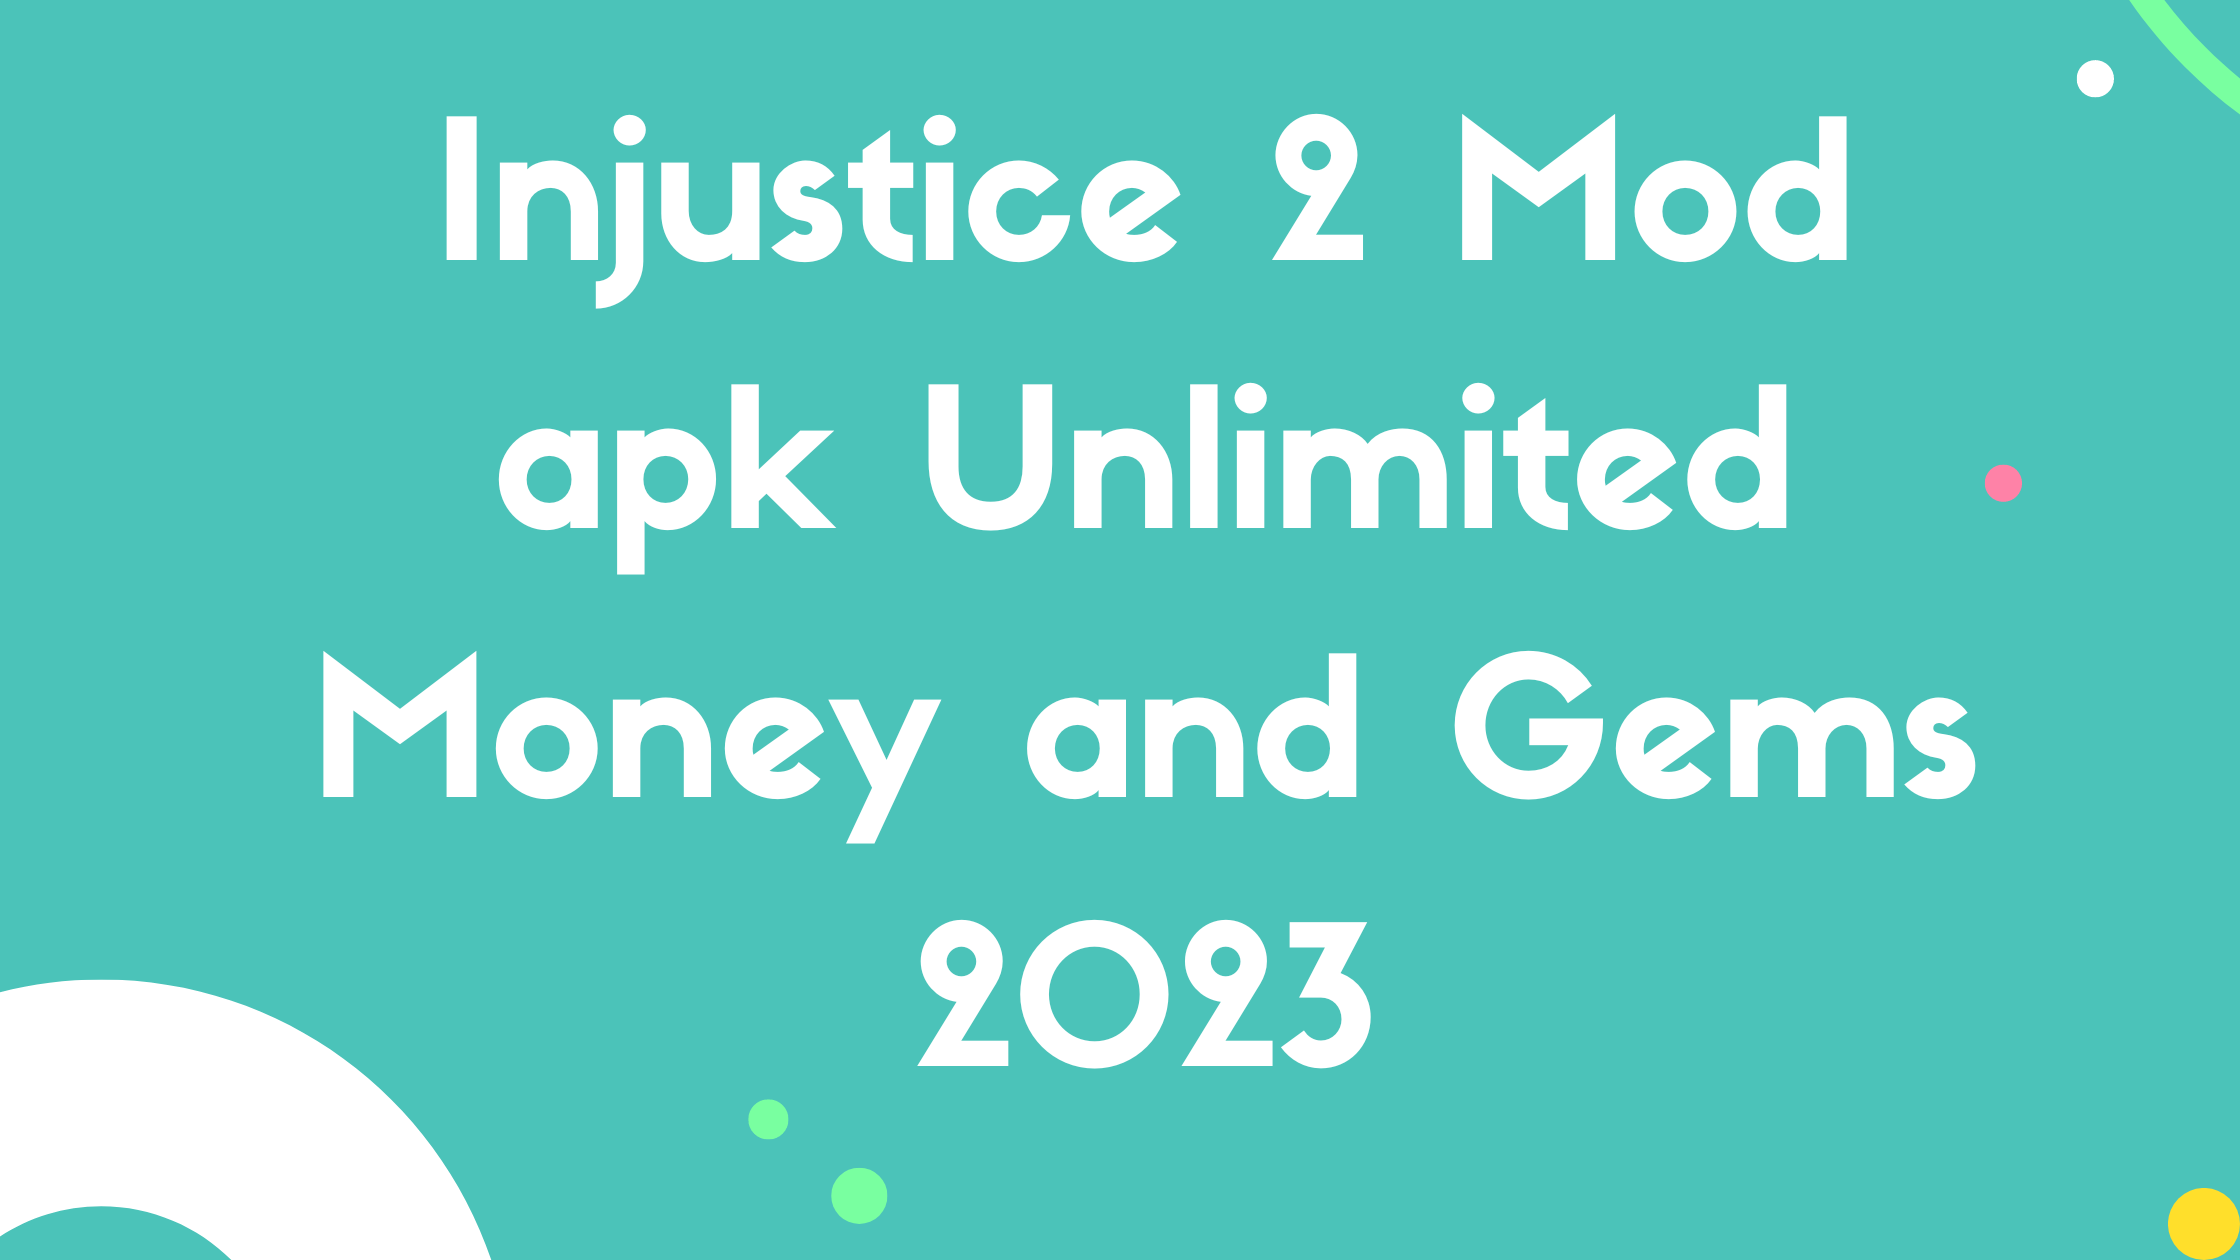 Injustice 2 Mod apk Unlimited Money and Gems 2023